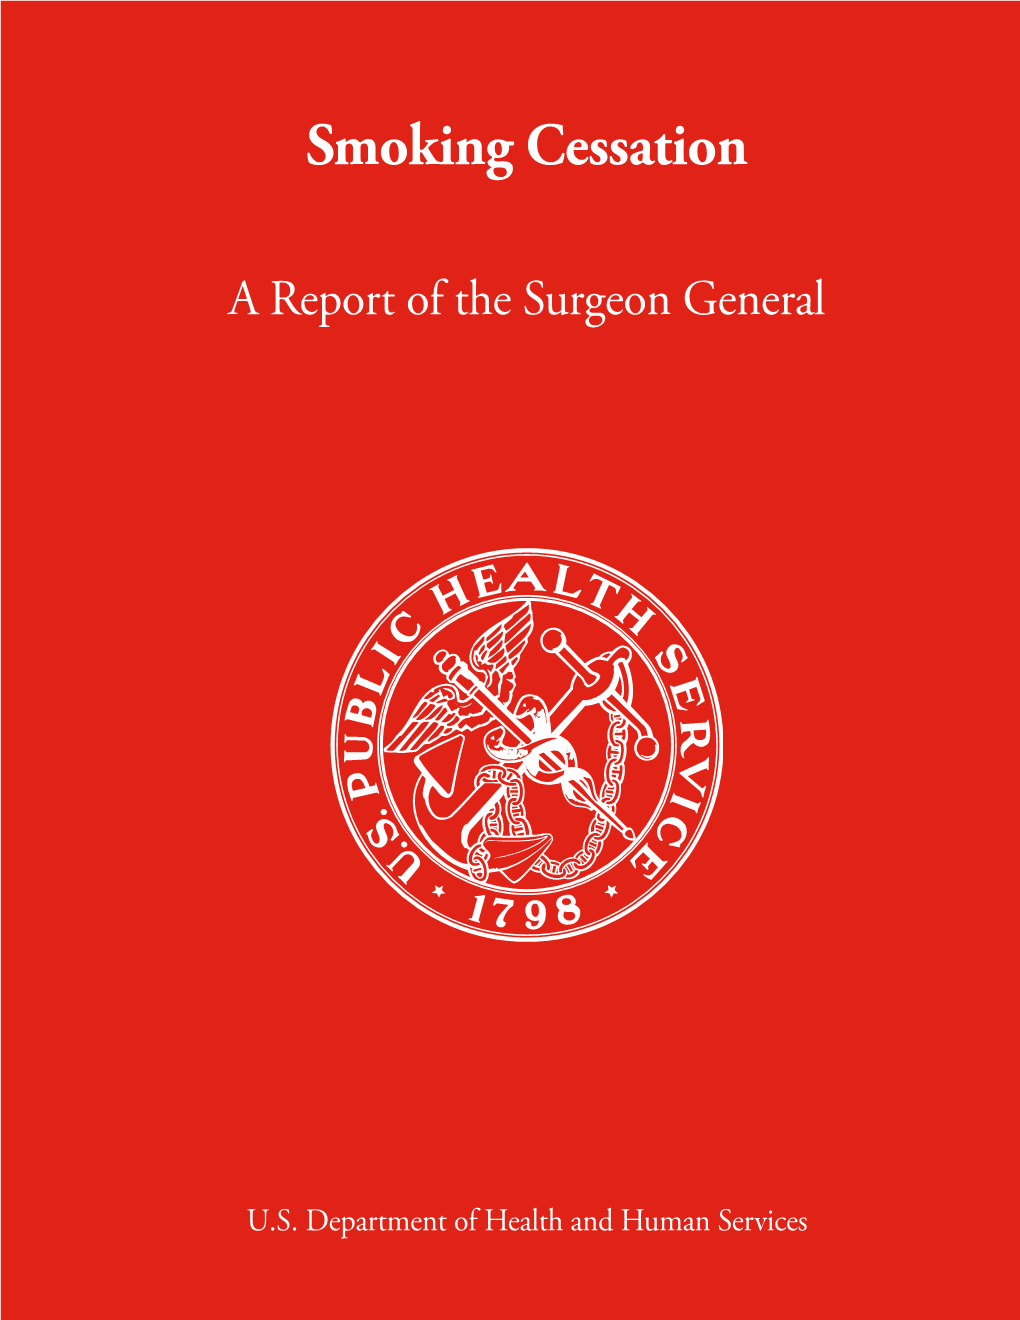 Smoking Cessation: a Report of the Surgeon General